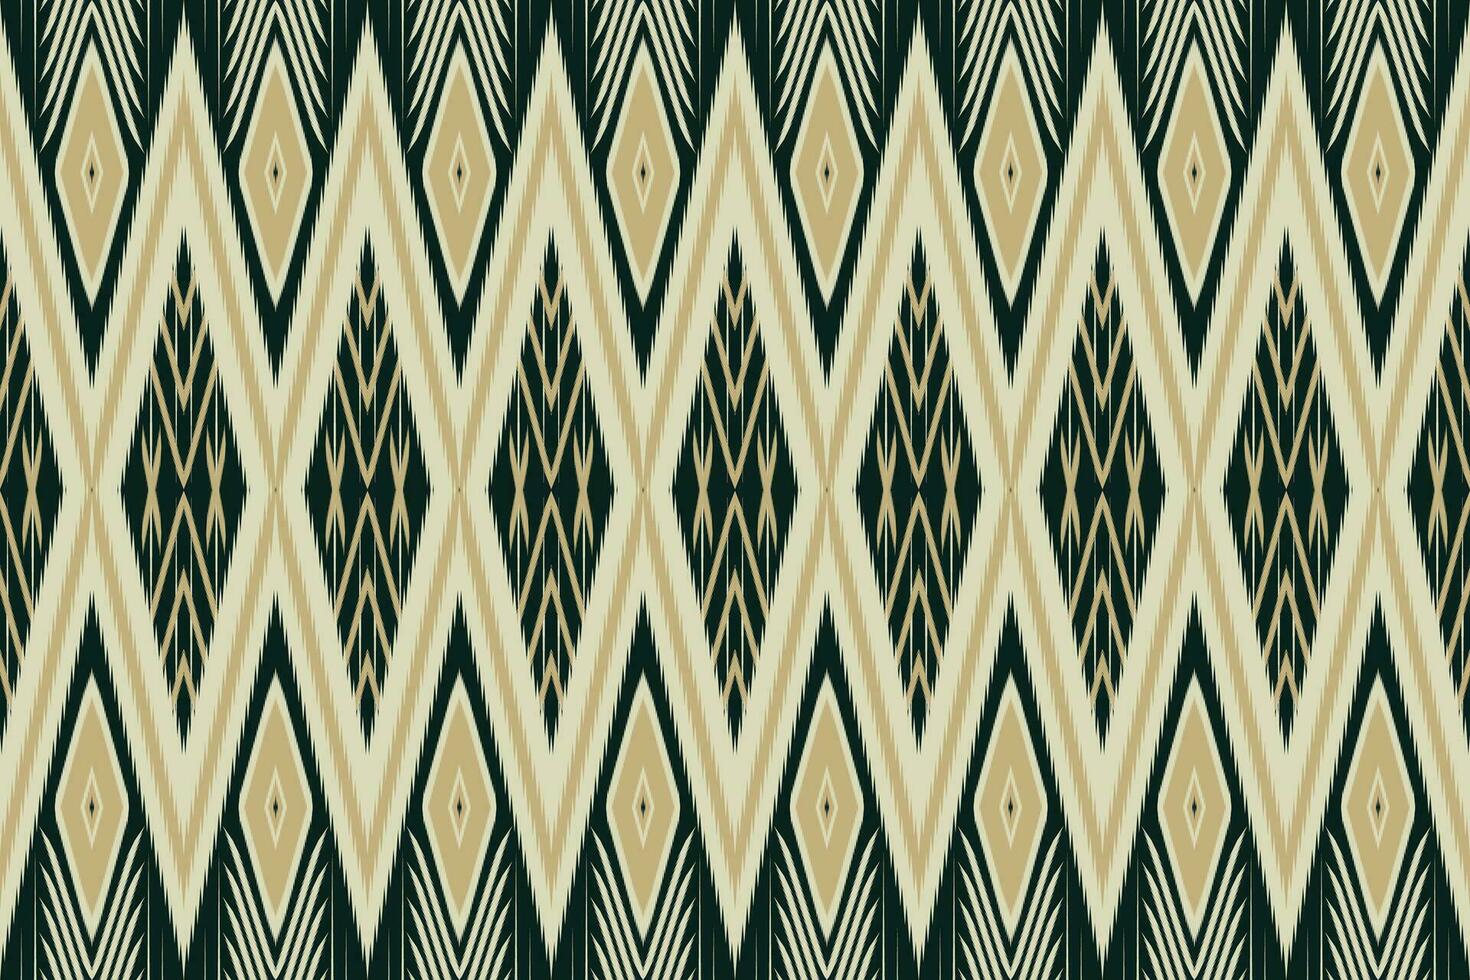 Geometric patchwork ethnic pattern vector for tribal boho design,Wallpaper,Wrapping,Fashion,Carpet,Clothing,Knitwear,Batik,Illustration.Ethnic abstract ikat.